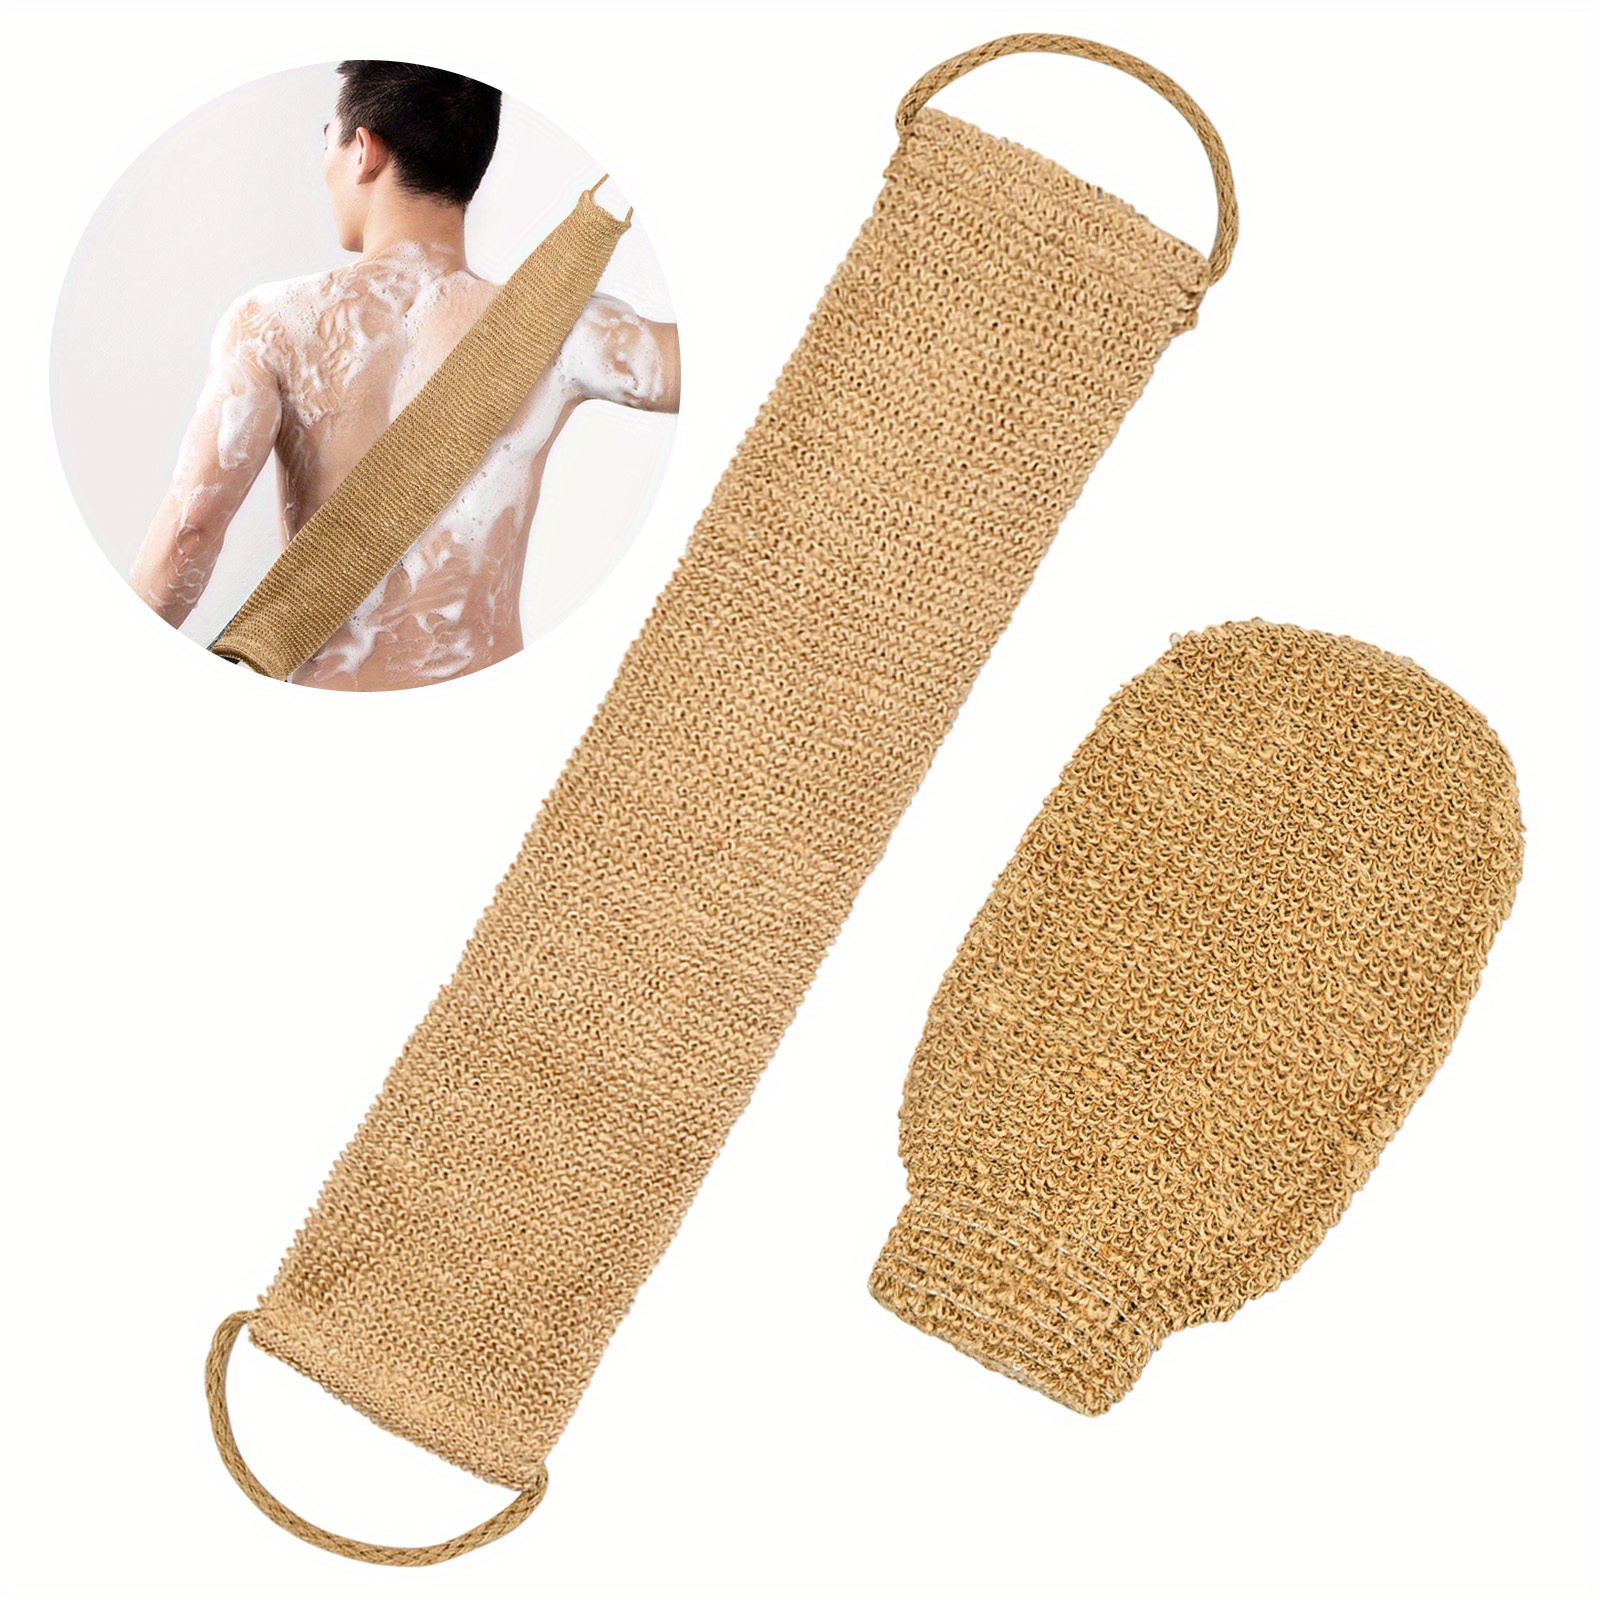 

1 Set Back Scrubber Exfoliator Set, Natural Exfoliating Glove And Washcloth Strap Towel, Body Cleaning Gloves For Men Women, Dead Skin Removal Scrub Gloves, Bath Scrubber For Cleaning Body